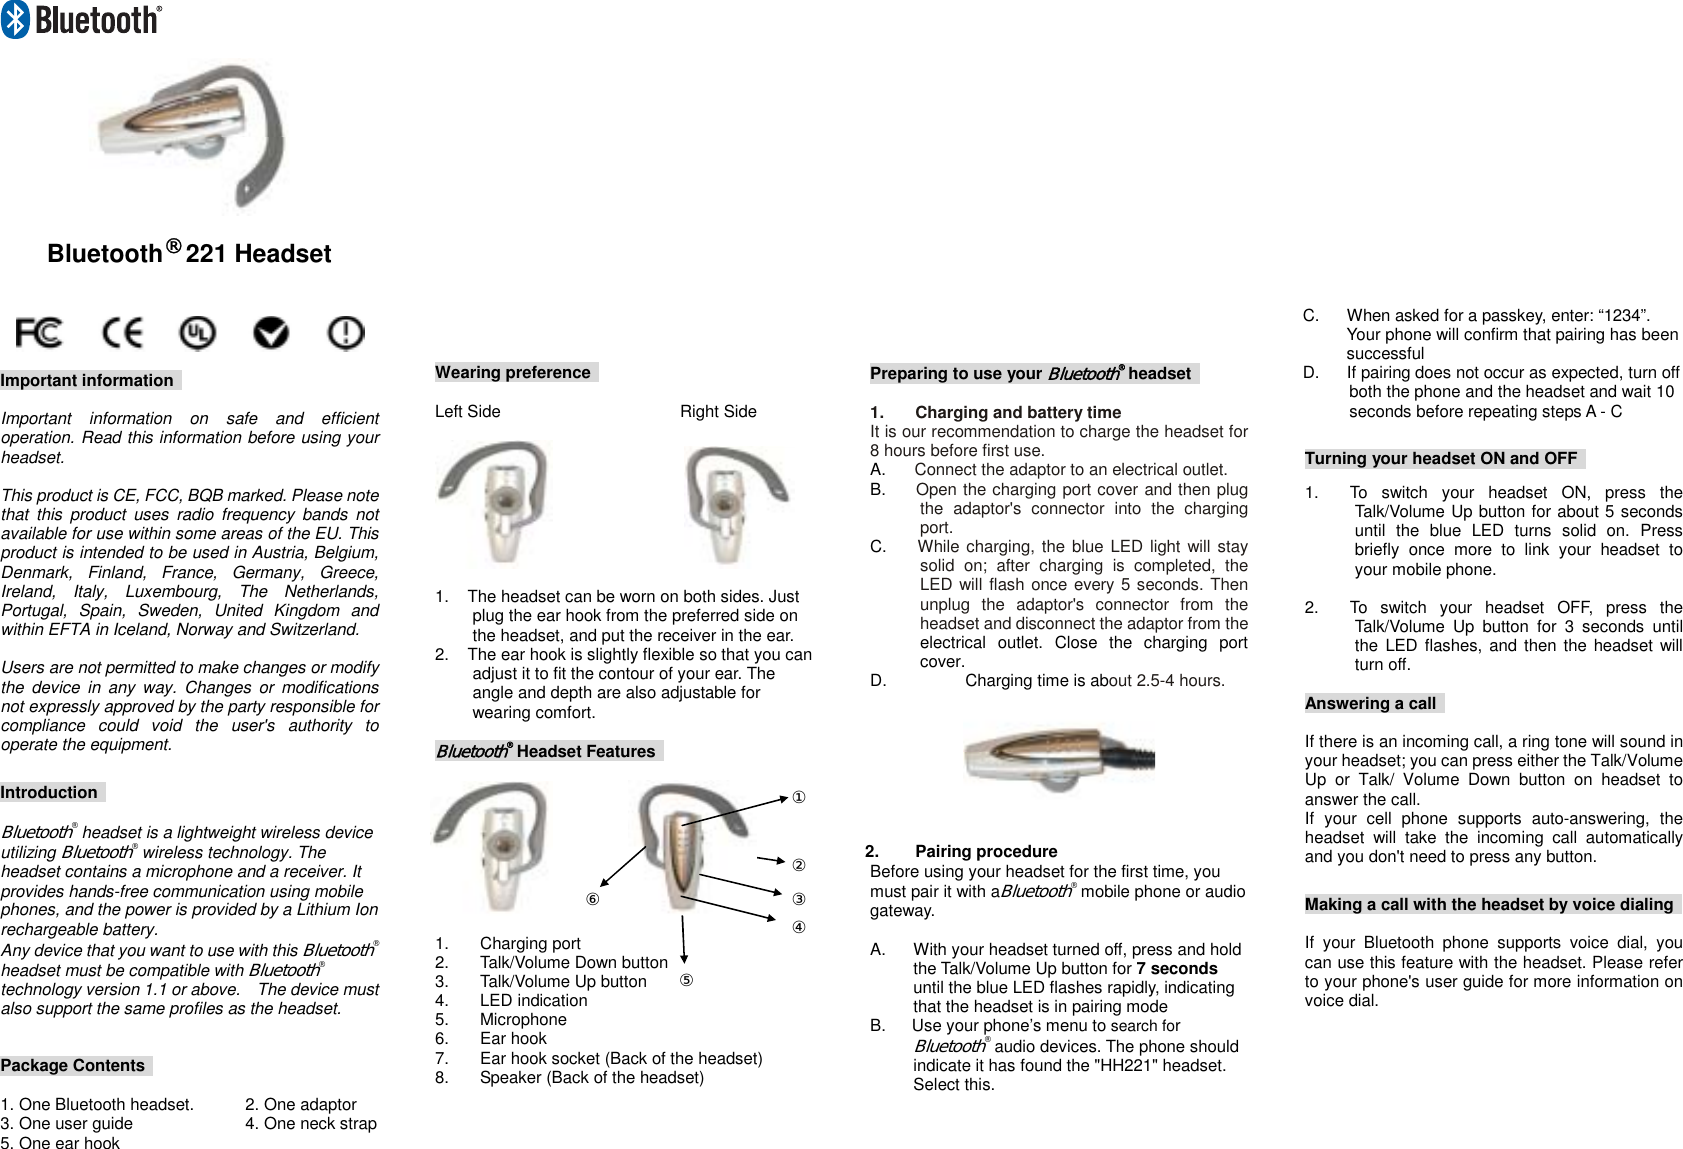     Bluetooth® 221 Headset     Important information    Important information on safe and efficient operation. Read this information before using your headset.  This product is CE, FCC, BQB marked. Please note that this product uses radio frequency bands not available for use within some areas of the EU. This product is intended to be used in Austria, Belgium, Denmark, Finland, France, Germany, Greece, Ireland, Italy, Luxembourg, The Netherlands, Portugal, Spain, Sweden, United Kingdom and within EFTA in Iceland, Norway and Switzerland.  Users are not permitted to make changes or modify the device in any way. Changes or modifications not expressly approved by the party responsible for compliance could void the user&apos;s authority to operate the equipment.  Introduction   Bluetooth® headset is a lightweight wireless device utilizing Bluetooth® wireless technology. The headset contains a microphone and a receiver. It provides hands-free communication using mobile phones, and the power is provided by a Lithium Ion rechargeable battery. Any device that you want to use with this Bluetooth® headset must be compatible with Bluetooth® technology version 1.1 or above.    The device must also support the same profiles as the headset.       Package Contents    1. One Bluetooth headset.   2. One adaptor 3. One user guide      4. One neck strap 5. One ear hook                     Wearing preference    Left Side    Right Side                     1.  The headset can be worn on both sides. Just plug the ear hook from the preferred side on the headset, and put the receiver in the ear. 2.  The ear hook is slightly flexible so that you can adjust it to fit the contour of your ear. The angle and depth are also adjustable for wearing comfort.  Bluetooth® Headset Features               1. Charging port  2.  Talk/Volume Down button 3. Talk/Volume Up button 4. LED indication  5. Microphone 6. Ear hook  7.  Ear hook socket (Back of the headset) 8.  Speaker (Back of the headset)                       Preparing to use your Bluetooth® headset   1.  Charging and battery time   It is our recommendation to charge the headset for 8 hours before first use. A.  Connect the adaptor to an electrical outlet. B.  Open the charging port cover and then plug the adaptor&apos;s connector into the charging port. C.  While charging, the blue LED light will stay solid on; after charging is completed, the LED will flash once every 5 seconds. Then unplug the adaptor&apos;s connector from the headset and disconnect the adaptor from the electrical outlet. Close the charging port cover. D.  Charging time is about 2.5-4 hours.   2. Pairing procedure Before using your headset for the first time, you must pair it with aBluetooth® mobile phone or audio gateway.   A.  With your headset turned off, press and hold the Talk/Volume Up button for 7 seconds until the blue LED flashes rapidly, indicating that the headset is in pairing mode B.  Use your phone’s menu to search for Bluetooth® audio devices. The phone should indicate it has found the &quot;HH221&quot; headset. Select this.                     C.  When asked for a passkey, enter: “1234”. Your phone will confirm that pairing has been successful D.  If pairing does not occur as expected, turn off both the phone and the headset and wait 10 seconds before repeating steps A - C  Turning your headset ON and OFF    1.  To switch your headset ON, press the Talk/Volume Up button for about 5 seconds until the blue LED turns solid on. Press briefly once more to link your headset to your mobile phone.  2.  To switch your headset OFF, press the Talk/Volume Up button for 3 seconds until the LED flashes, and then the headset will turn off.    Answering a call    If there is an incoming call, a ring tone will sound in your headset; you can press either the Talk/Volume Up or Talk/ Volume Down button on headset to answer the call. If your cell phone supports auto-answering, the headset will take the incoming call automatically and you don&apos;t need to press any button.  Making a call with the headset by voice dialing    If your Bluetooth phone supports voice dial, you can use this feature with the headset. Please refer to your phone&apos;s user guide for more information on voice dial.         ①②③④⑤⑥